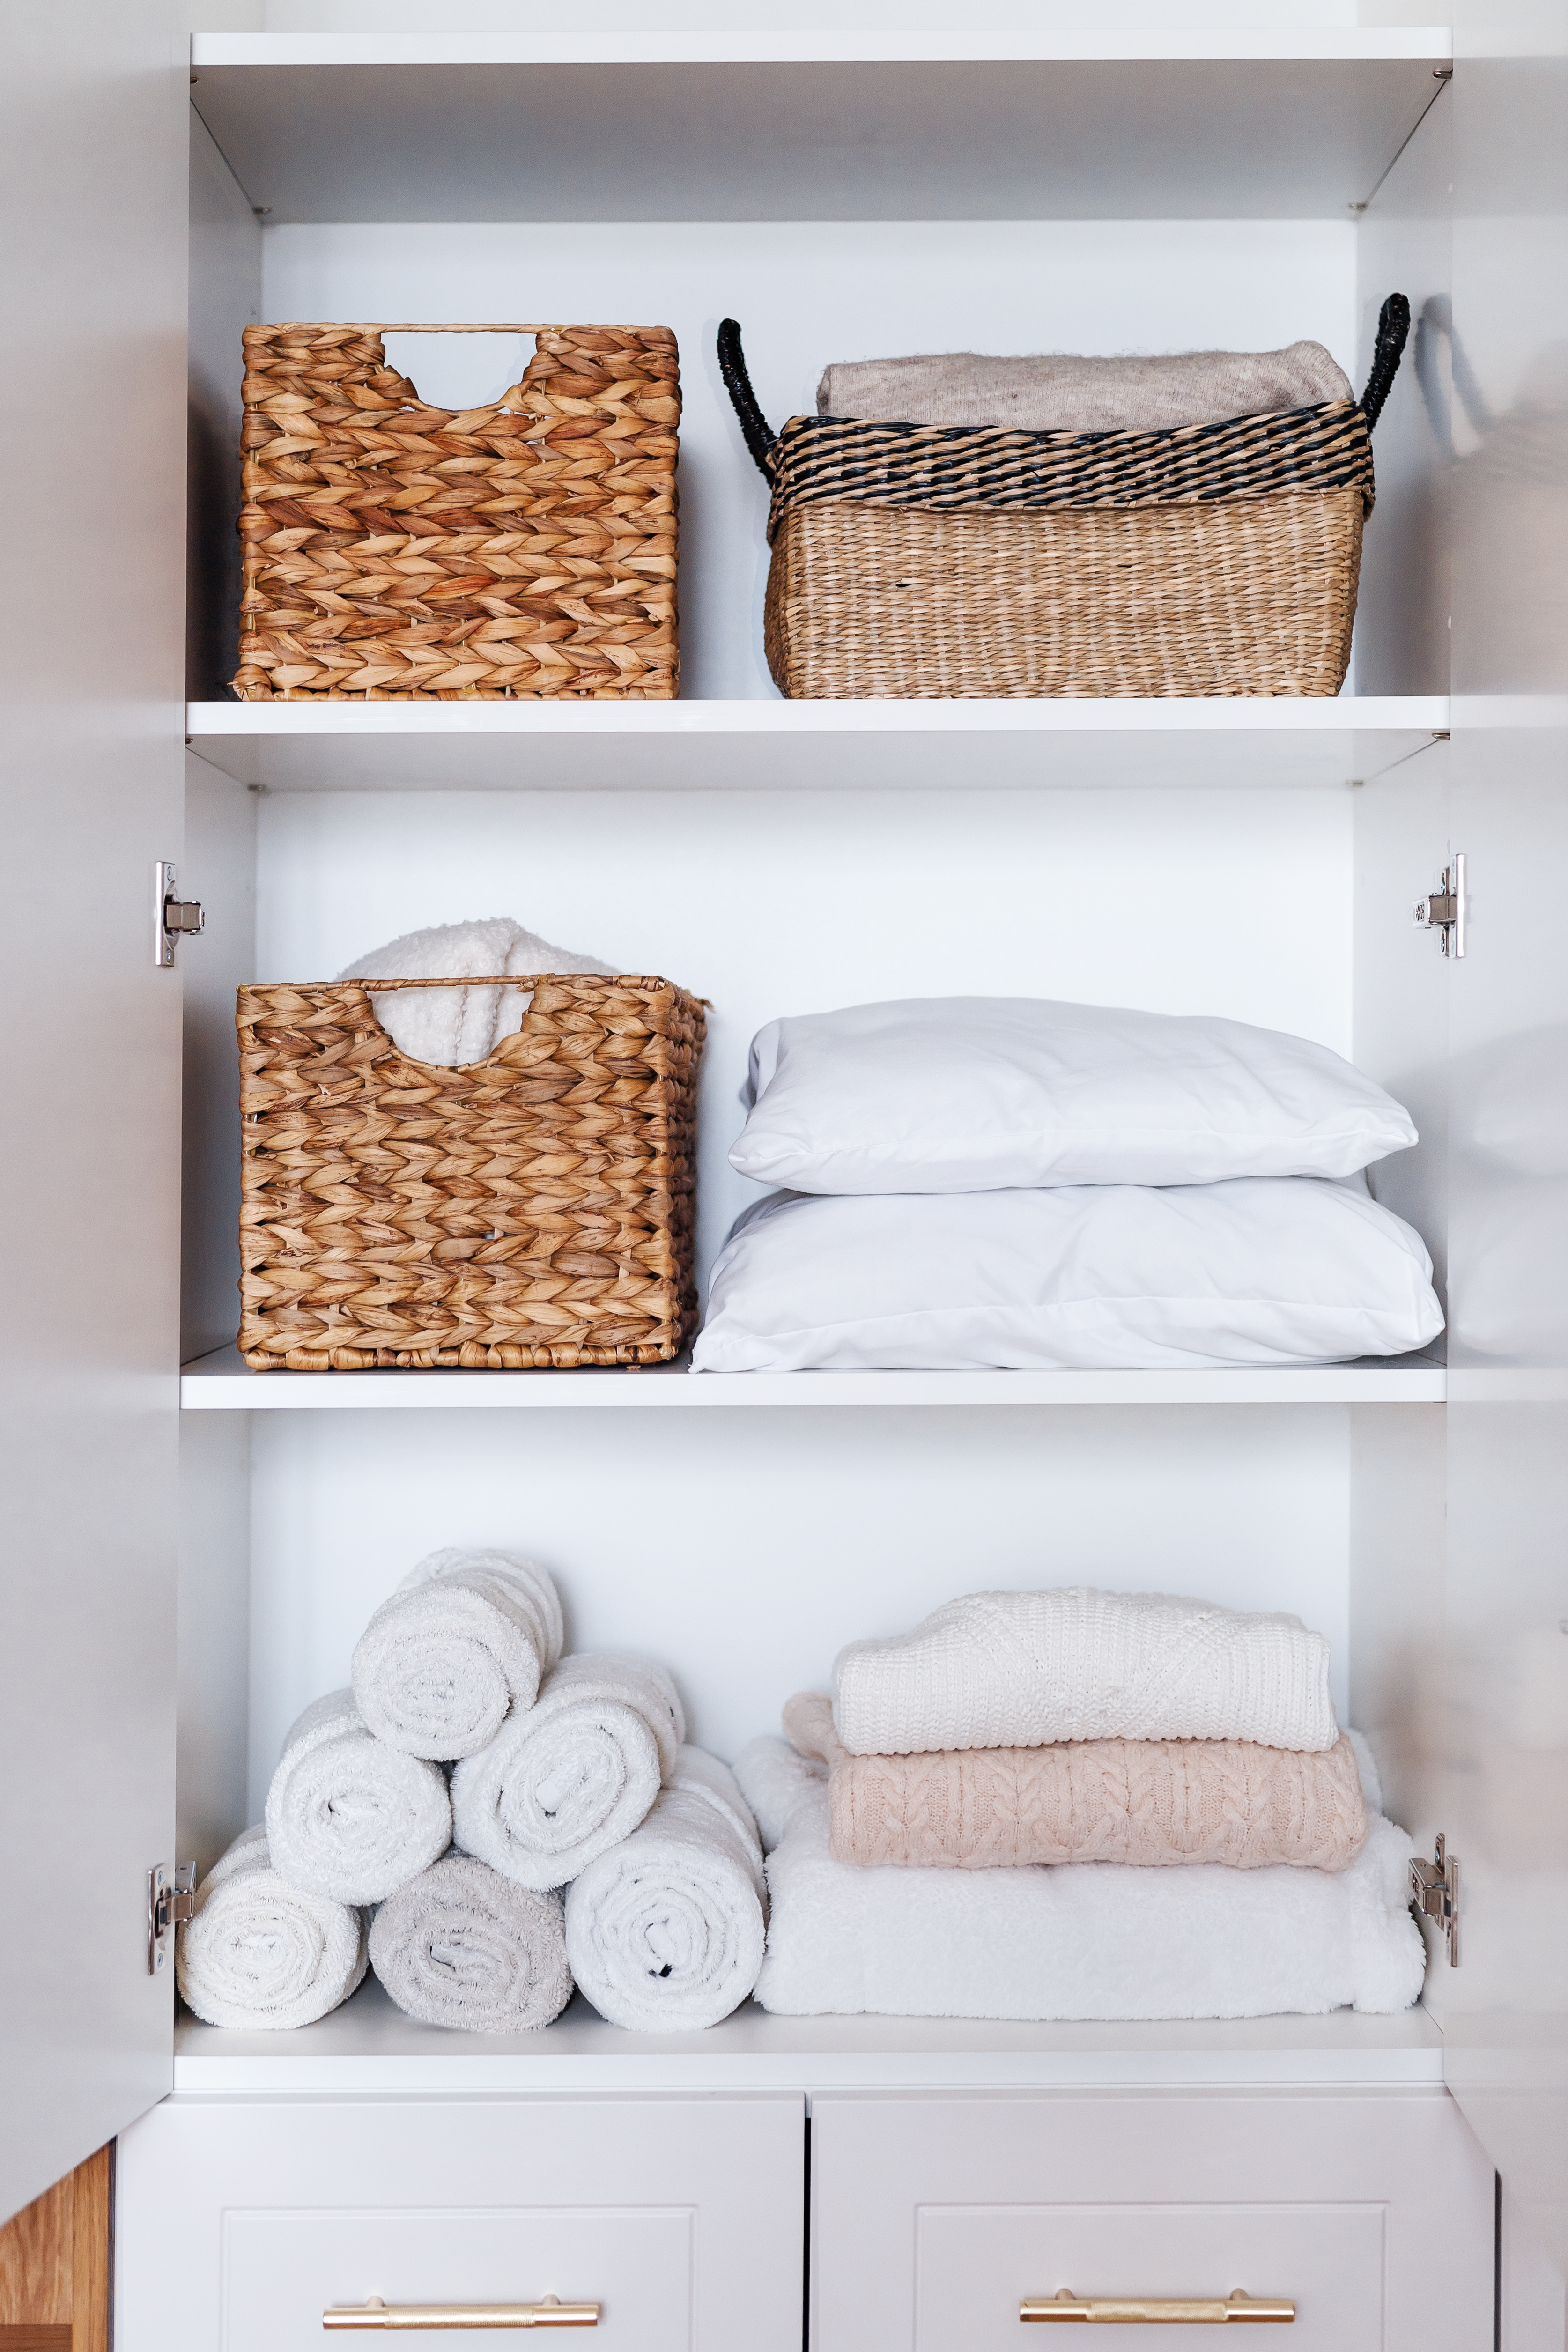 A clean closest with folded towels and bins